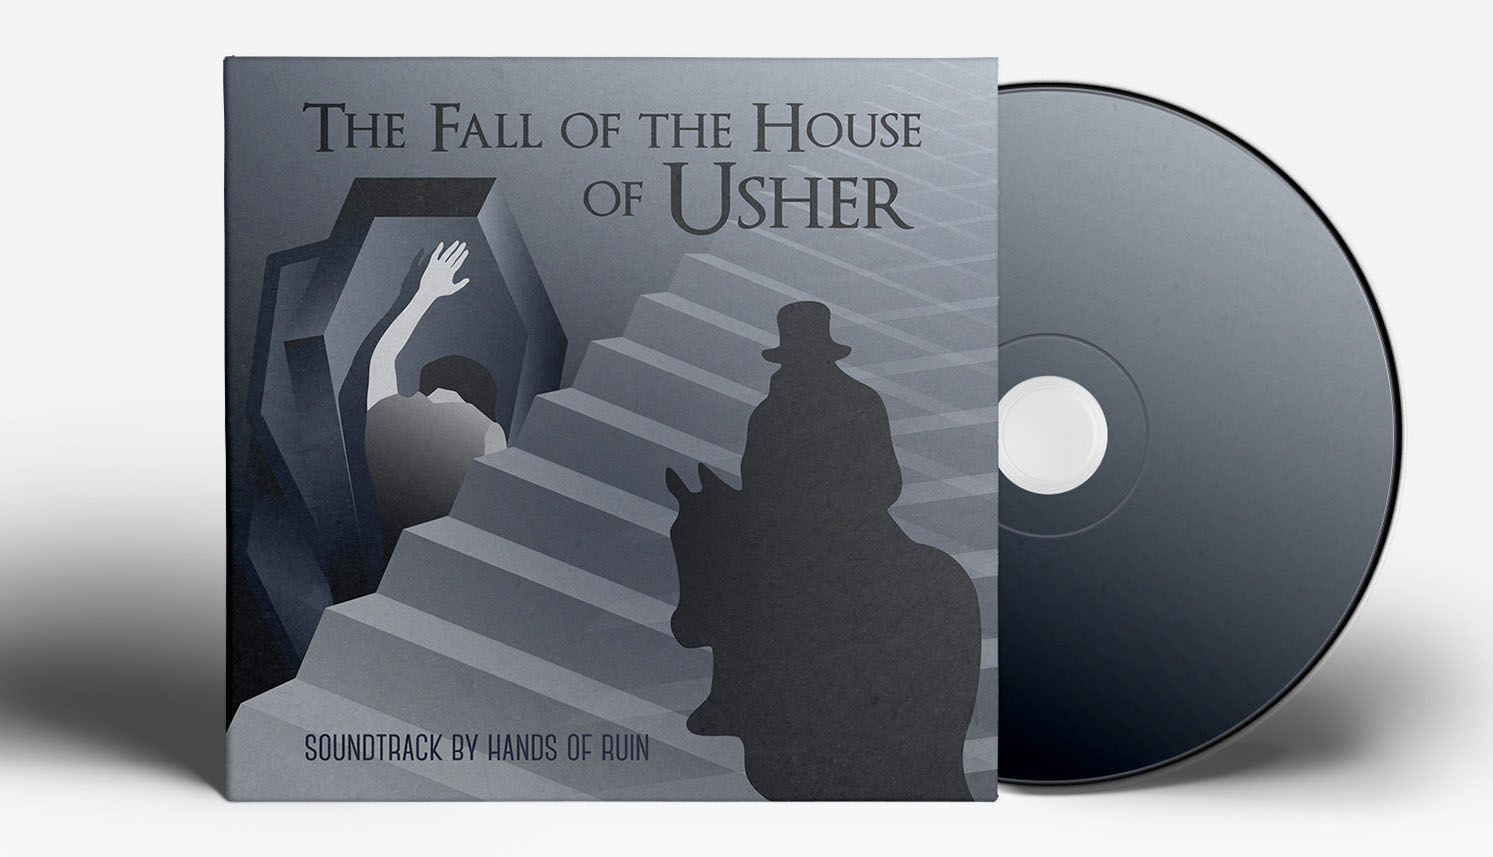 The Fall of the House of Usher cover design